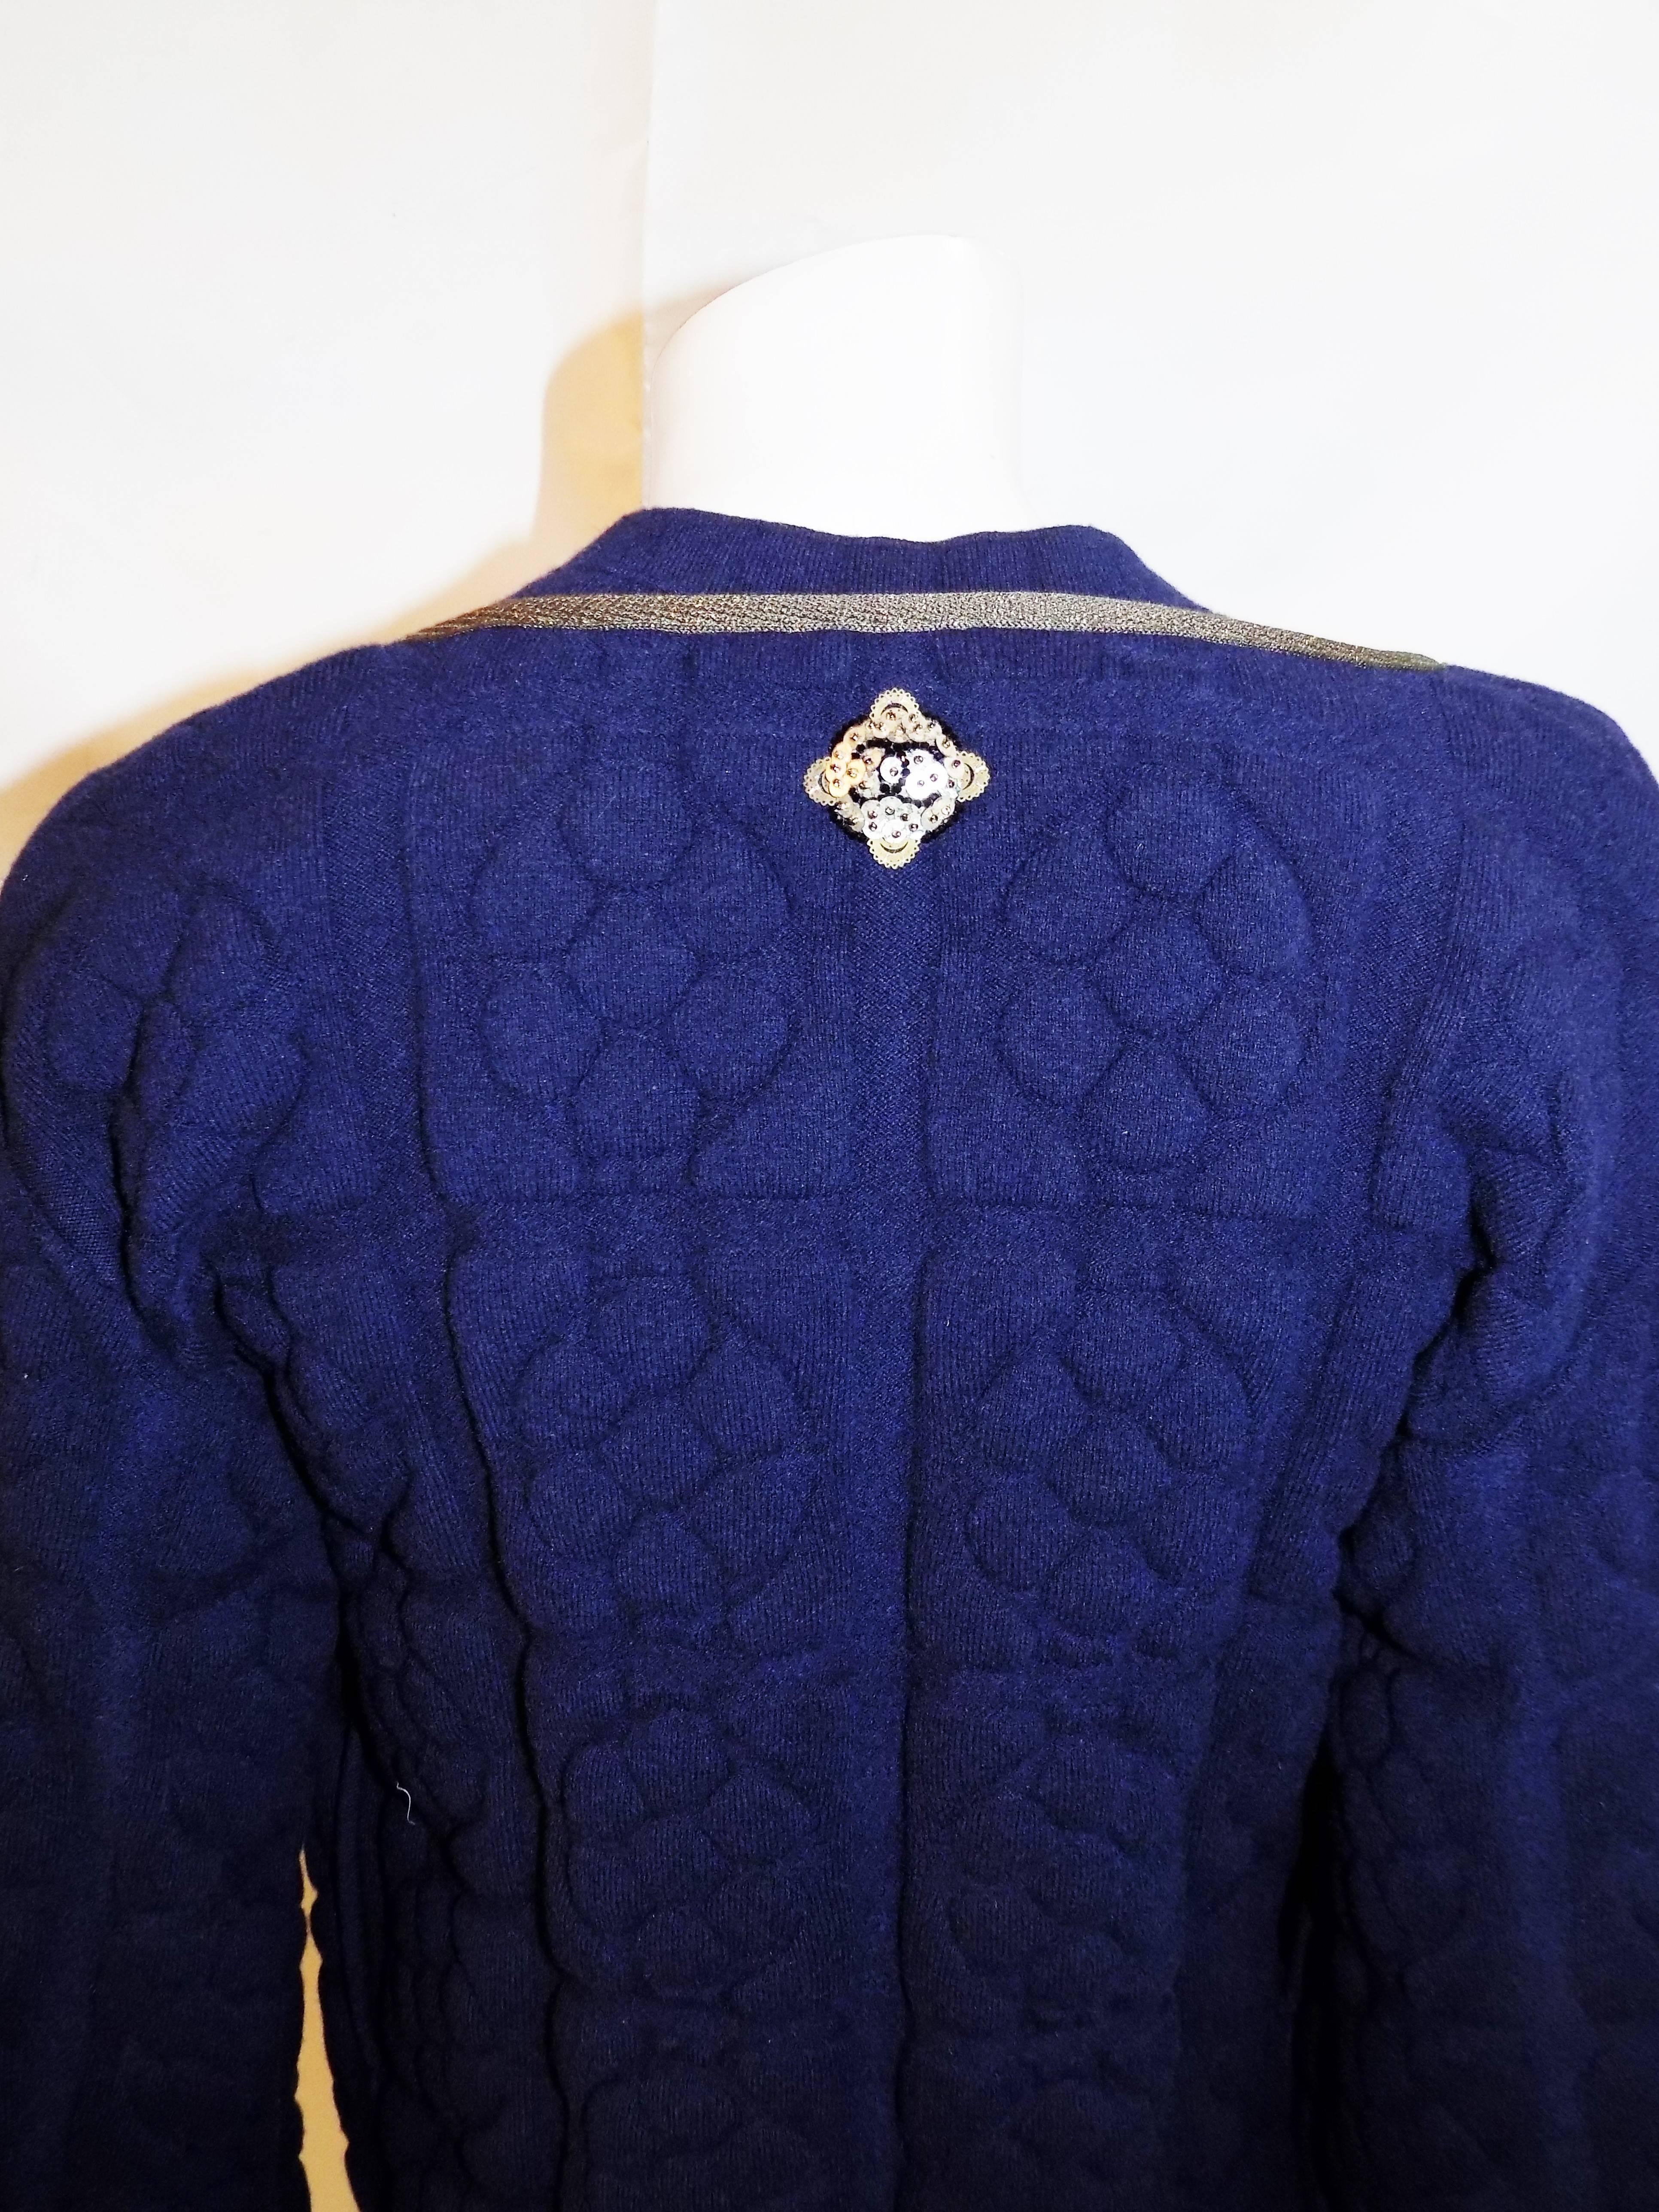 Chanel raise/ quilted knit navy dress and jacket with Lesage patch 2